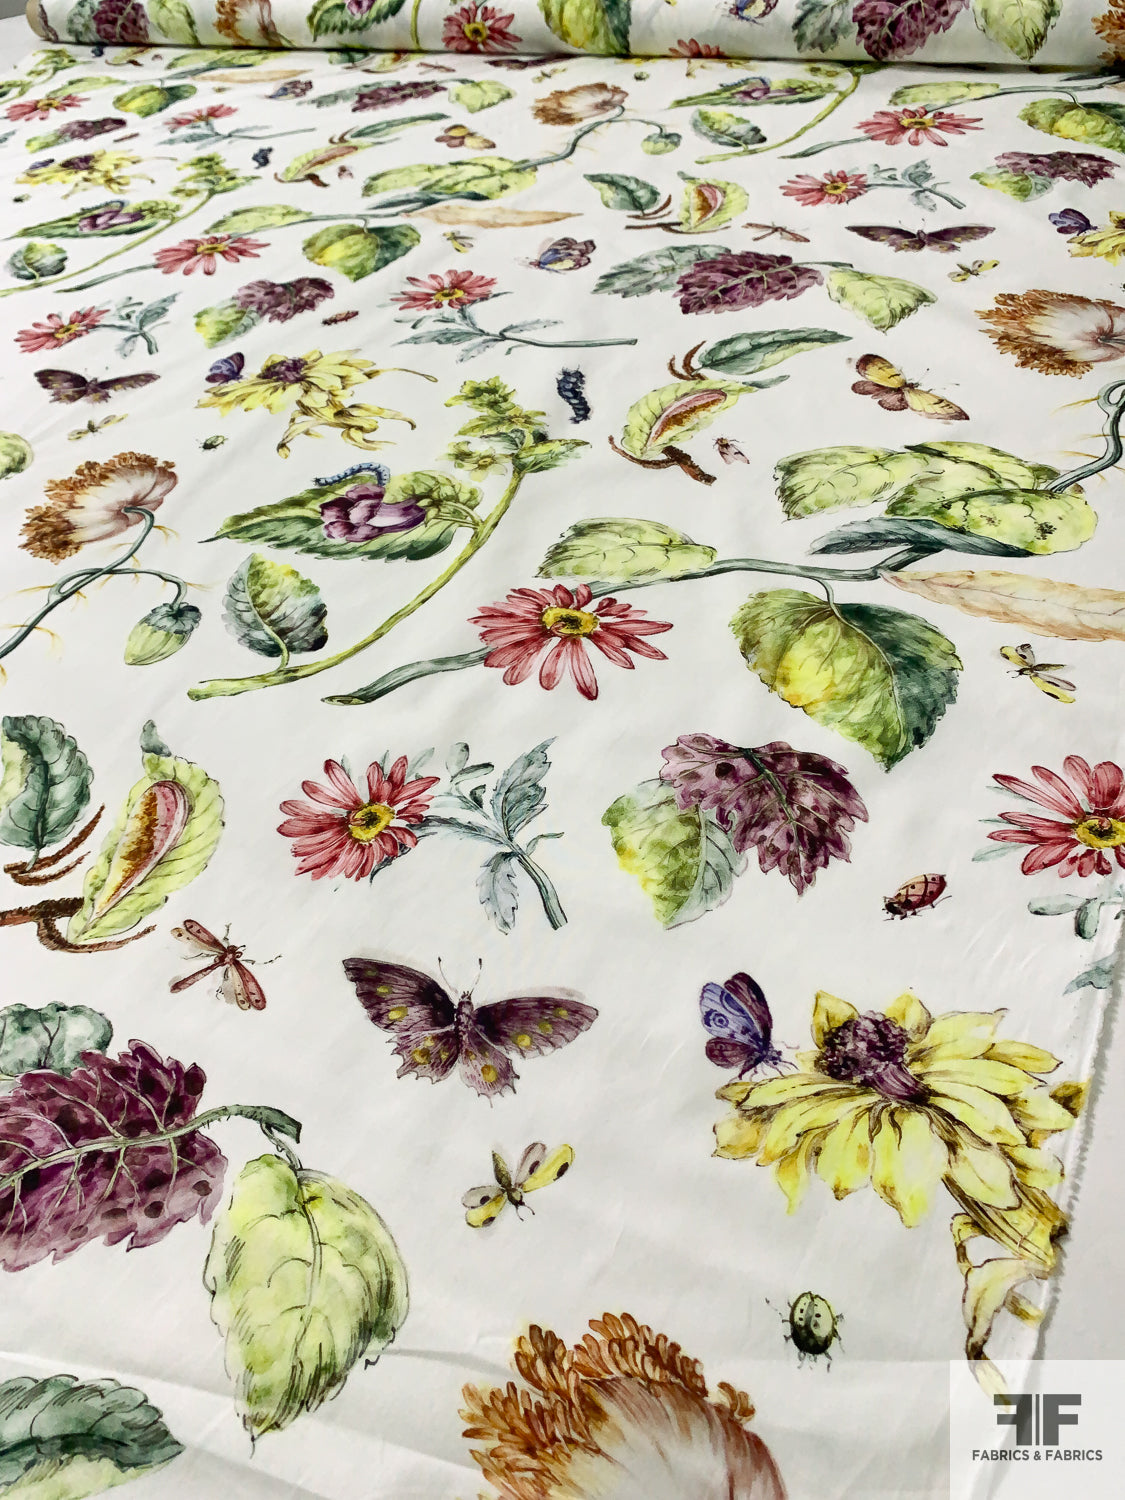 Italian Summer Leaf and Floral Printed Cotton Lawn - Greens / Yellows / Purple / Dusty Cranberry